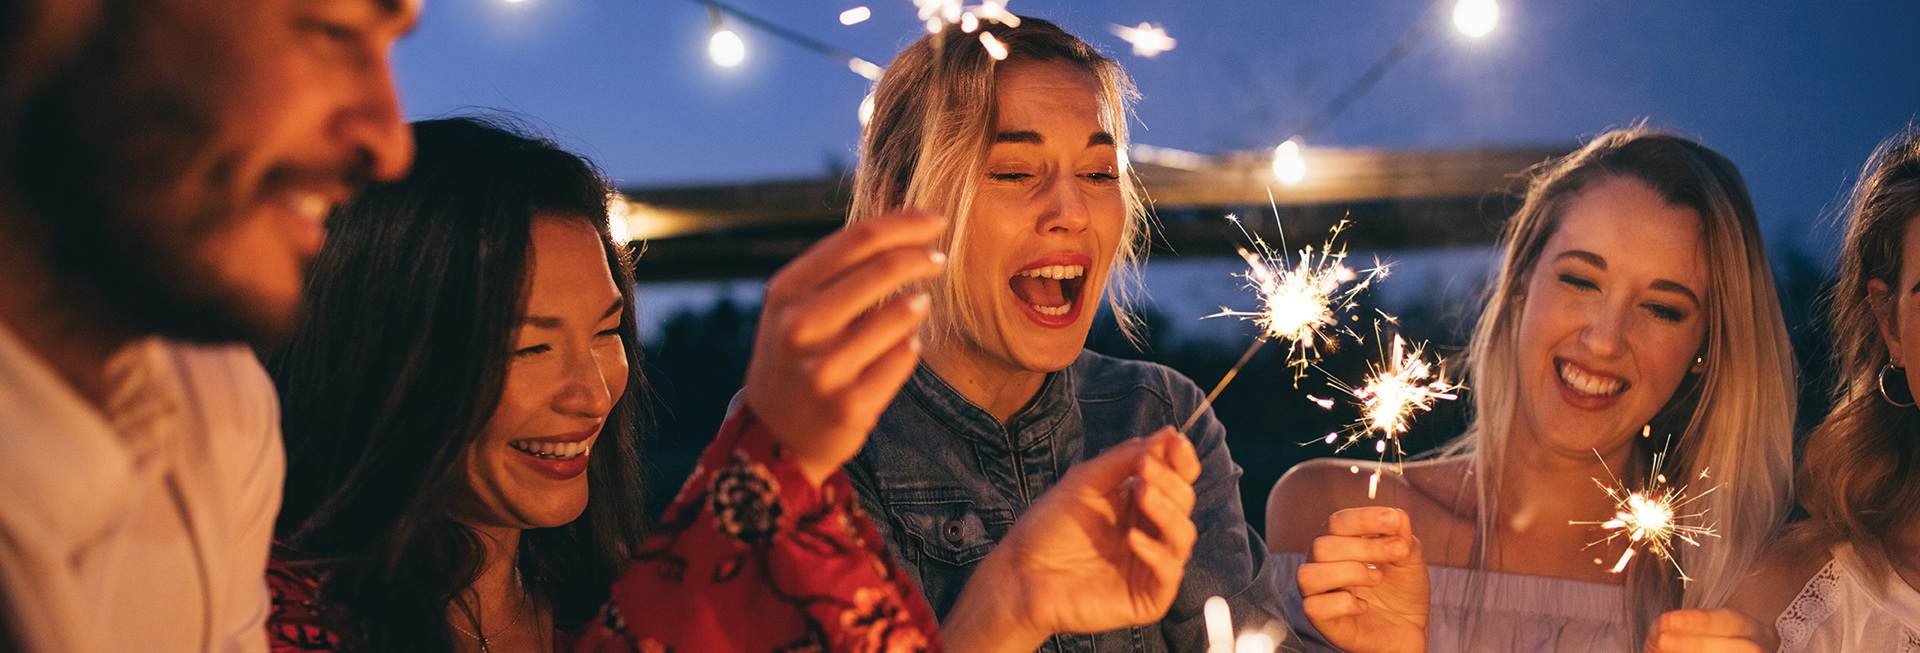 friends with sparklers